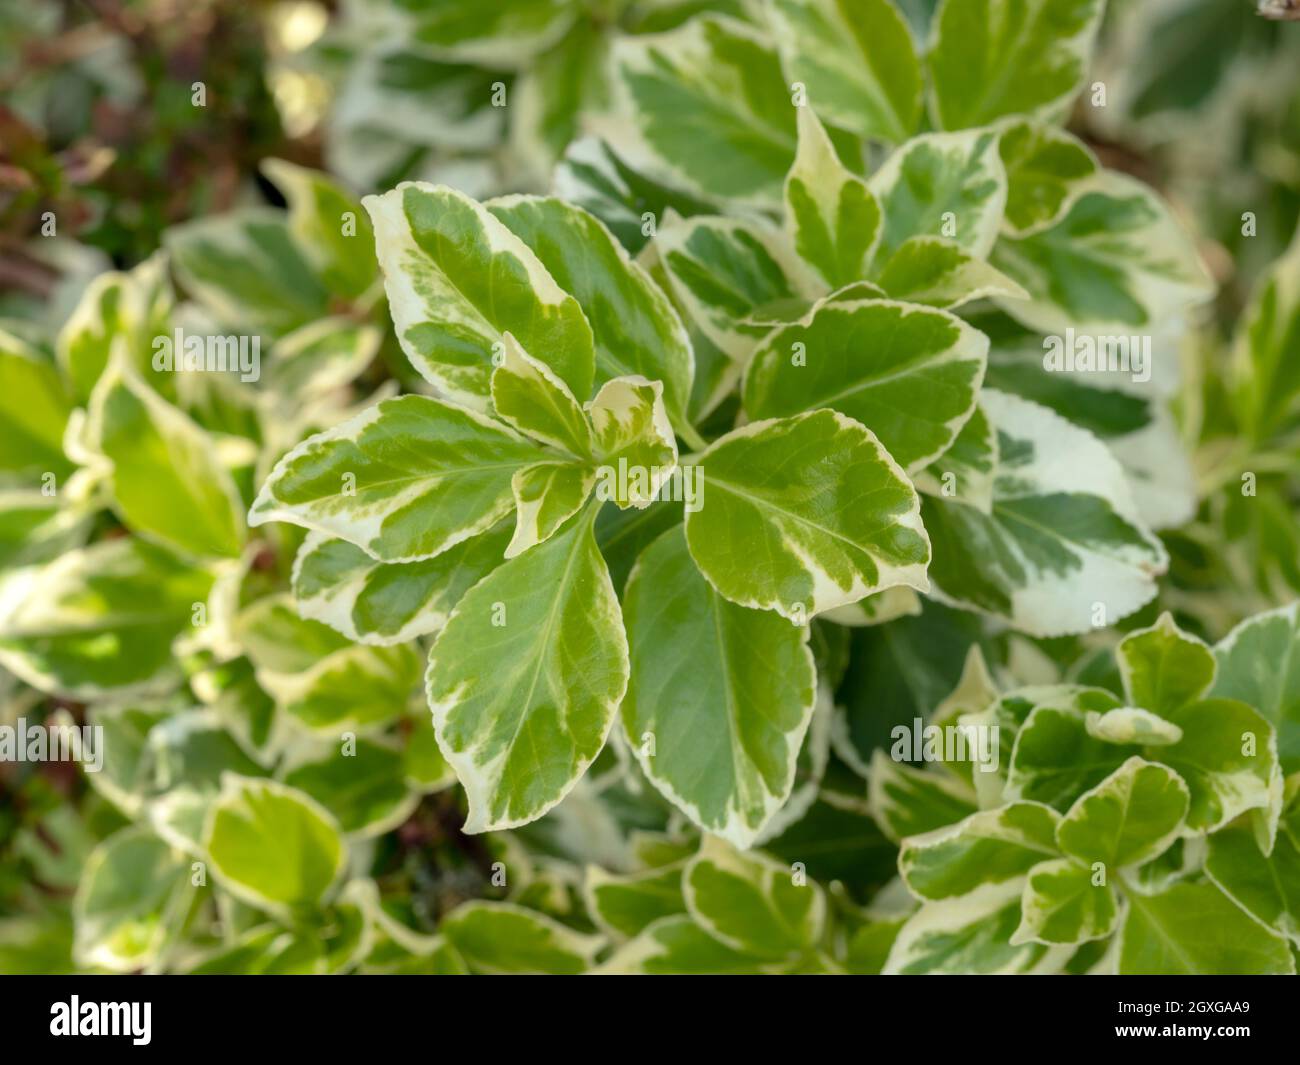 Closeup of beautiful variegated green leaves of a Japanese spindle tree, Euonymus japonicus Stock Photo